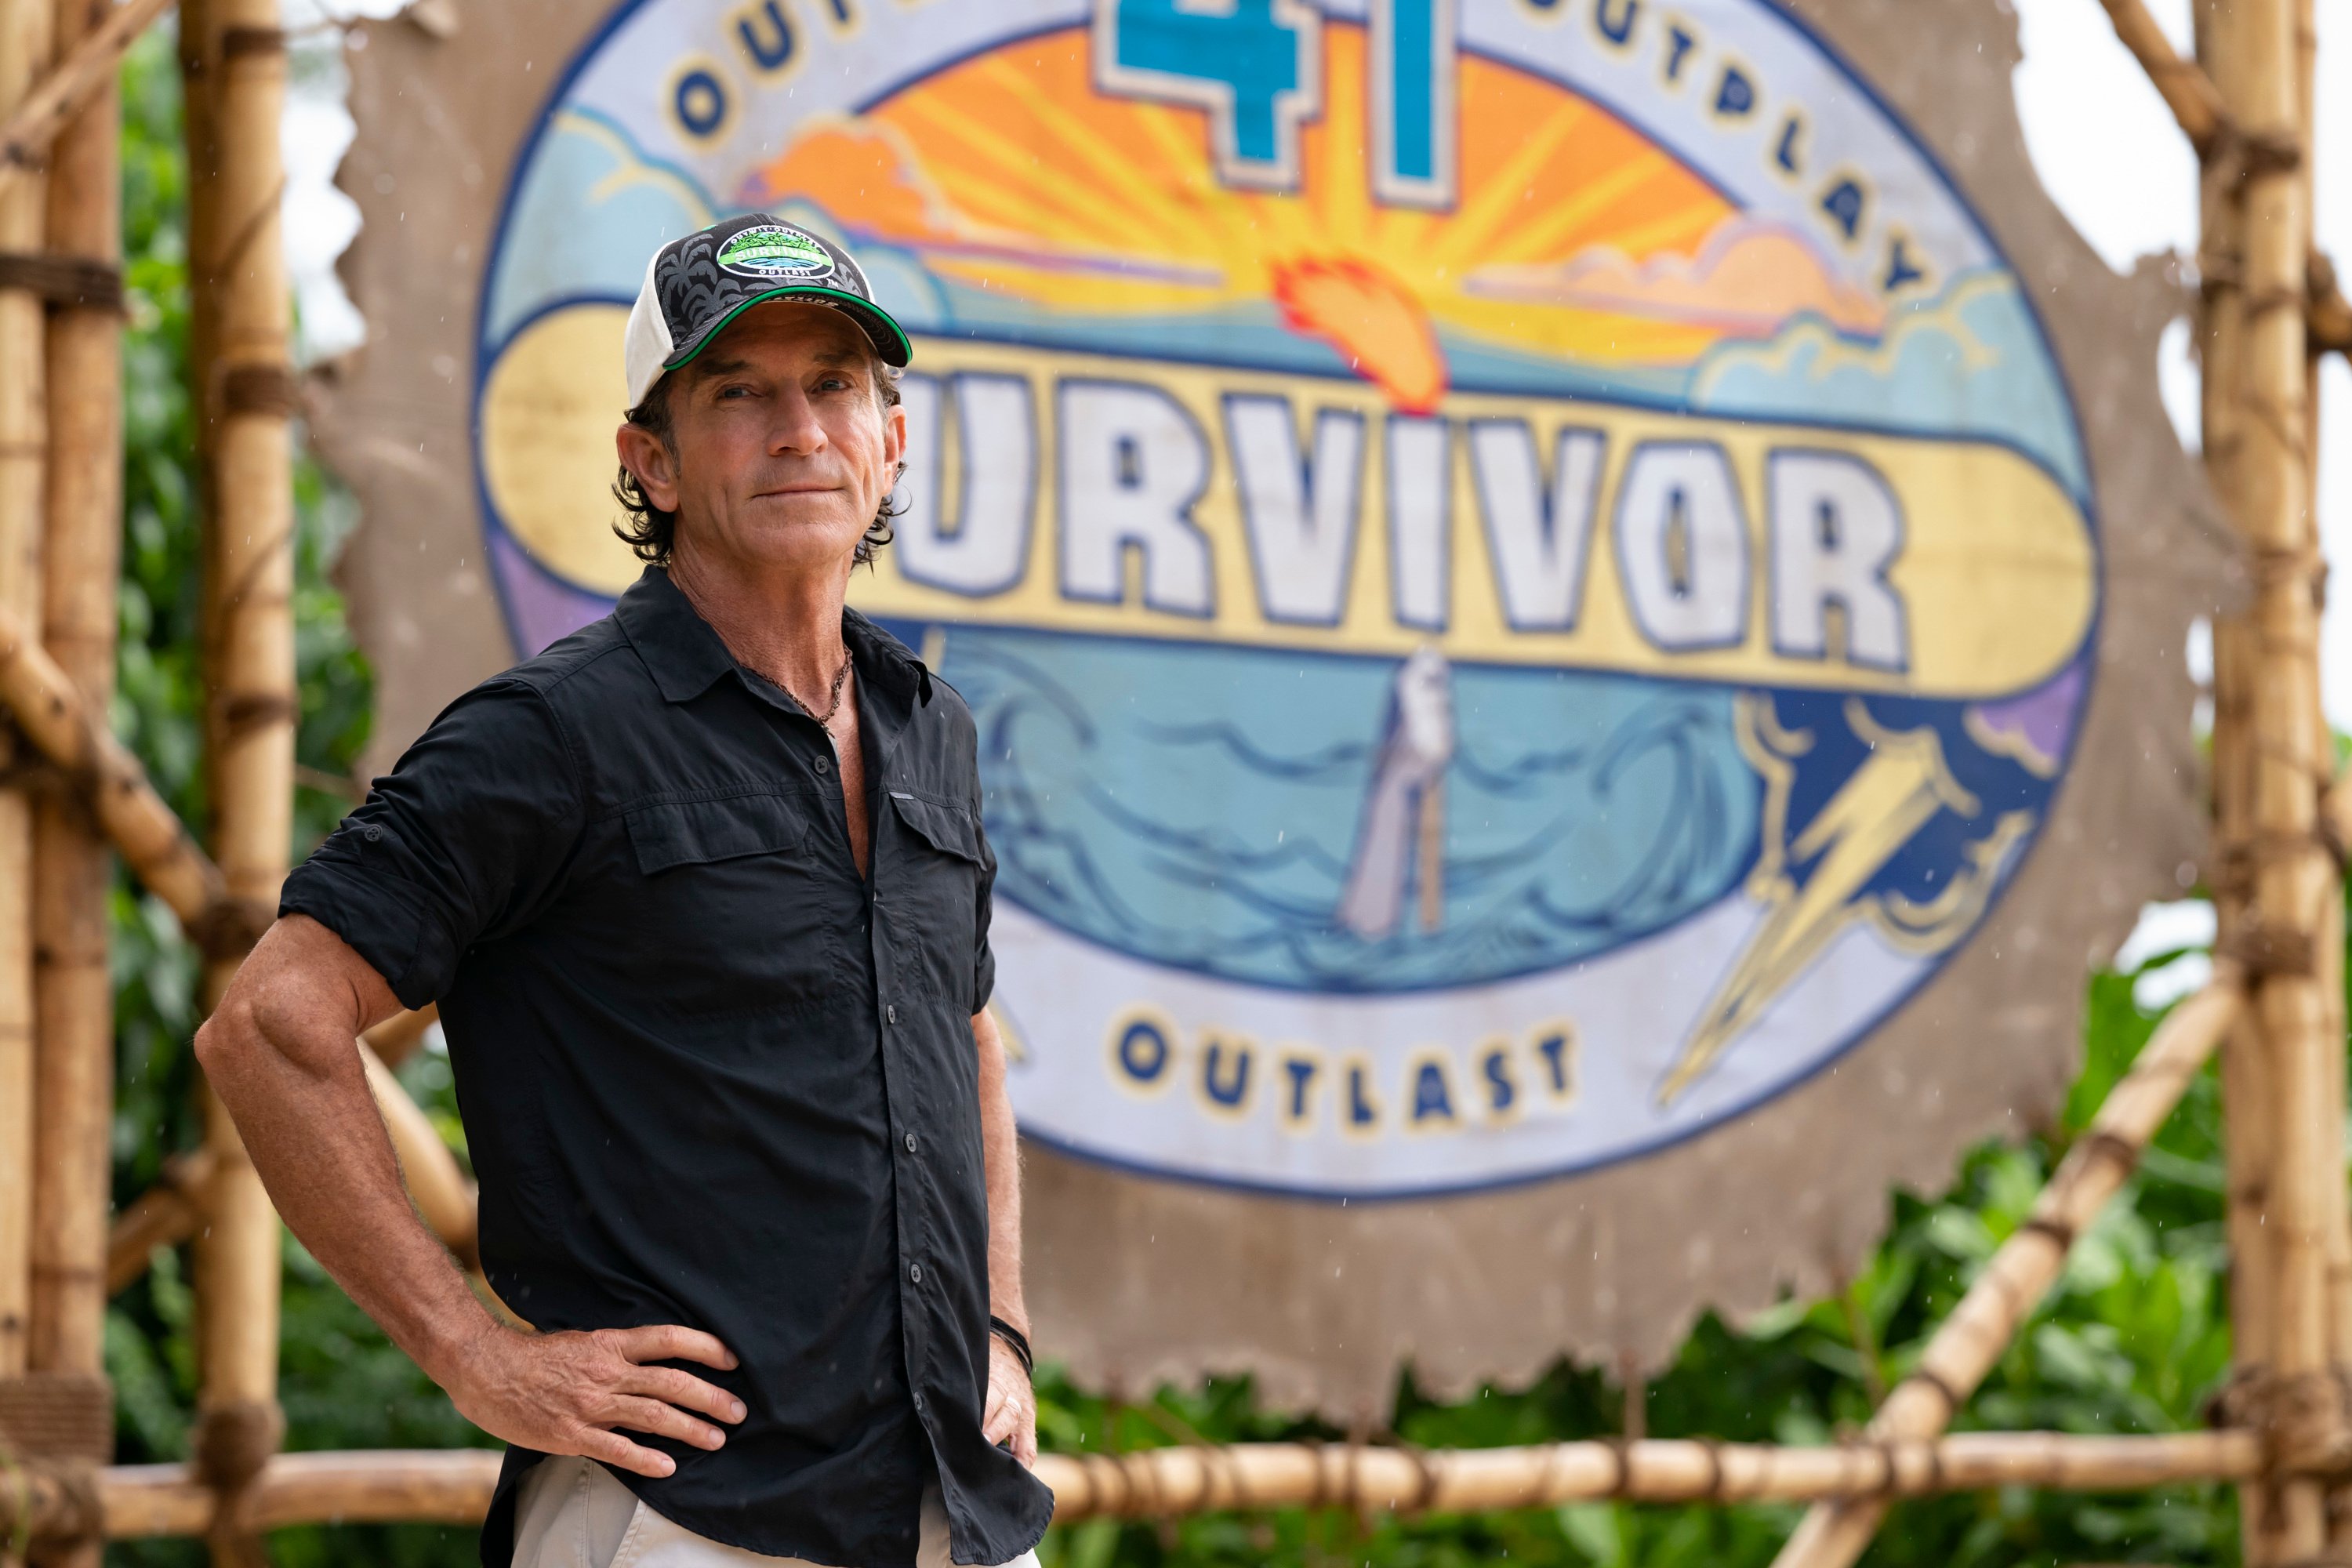 Jeff Probst standing in front of a 'Survivor' Season 41 banner on the island as he prepares to greet the 'Survivor' Season 41 cast